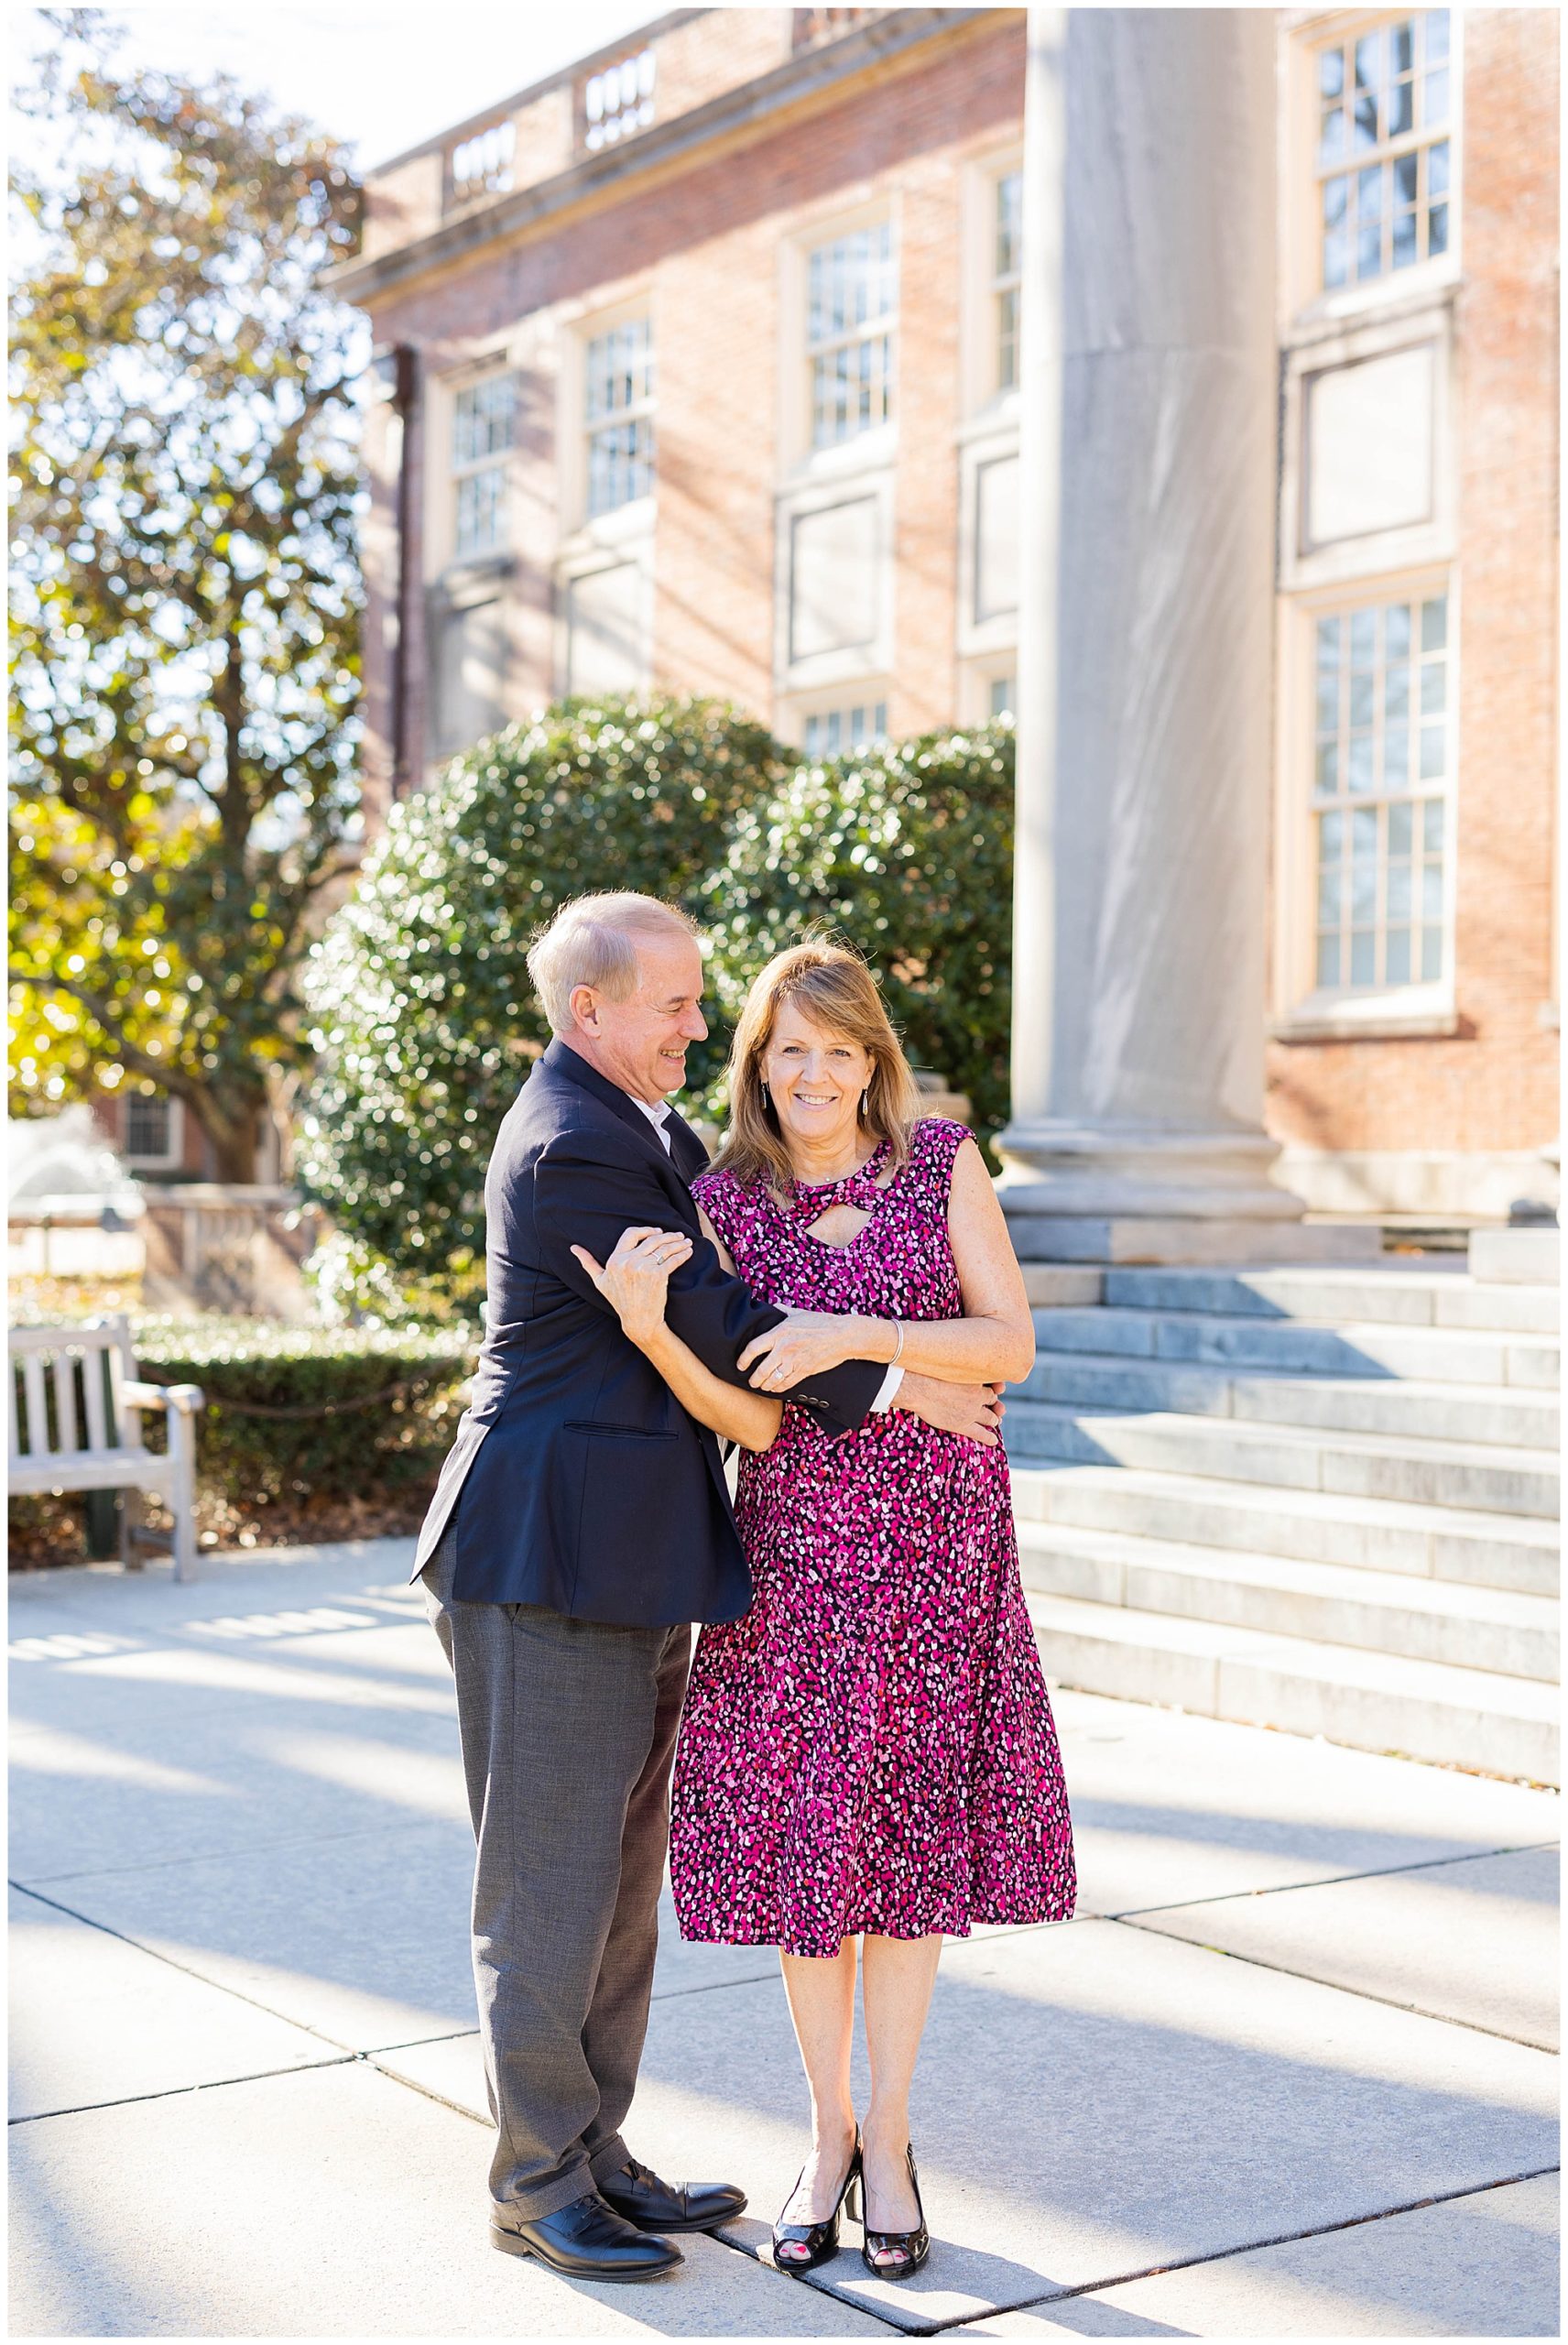 Eleanor Stenner Photography - a Birmingham, AL wedding photographer - photographs Claude & Connie at the Vulcan statue and Samford University for their engagement photos.